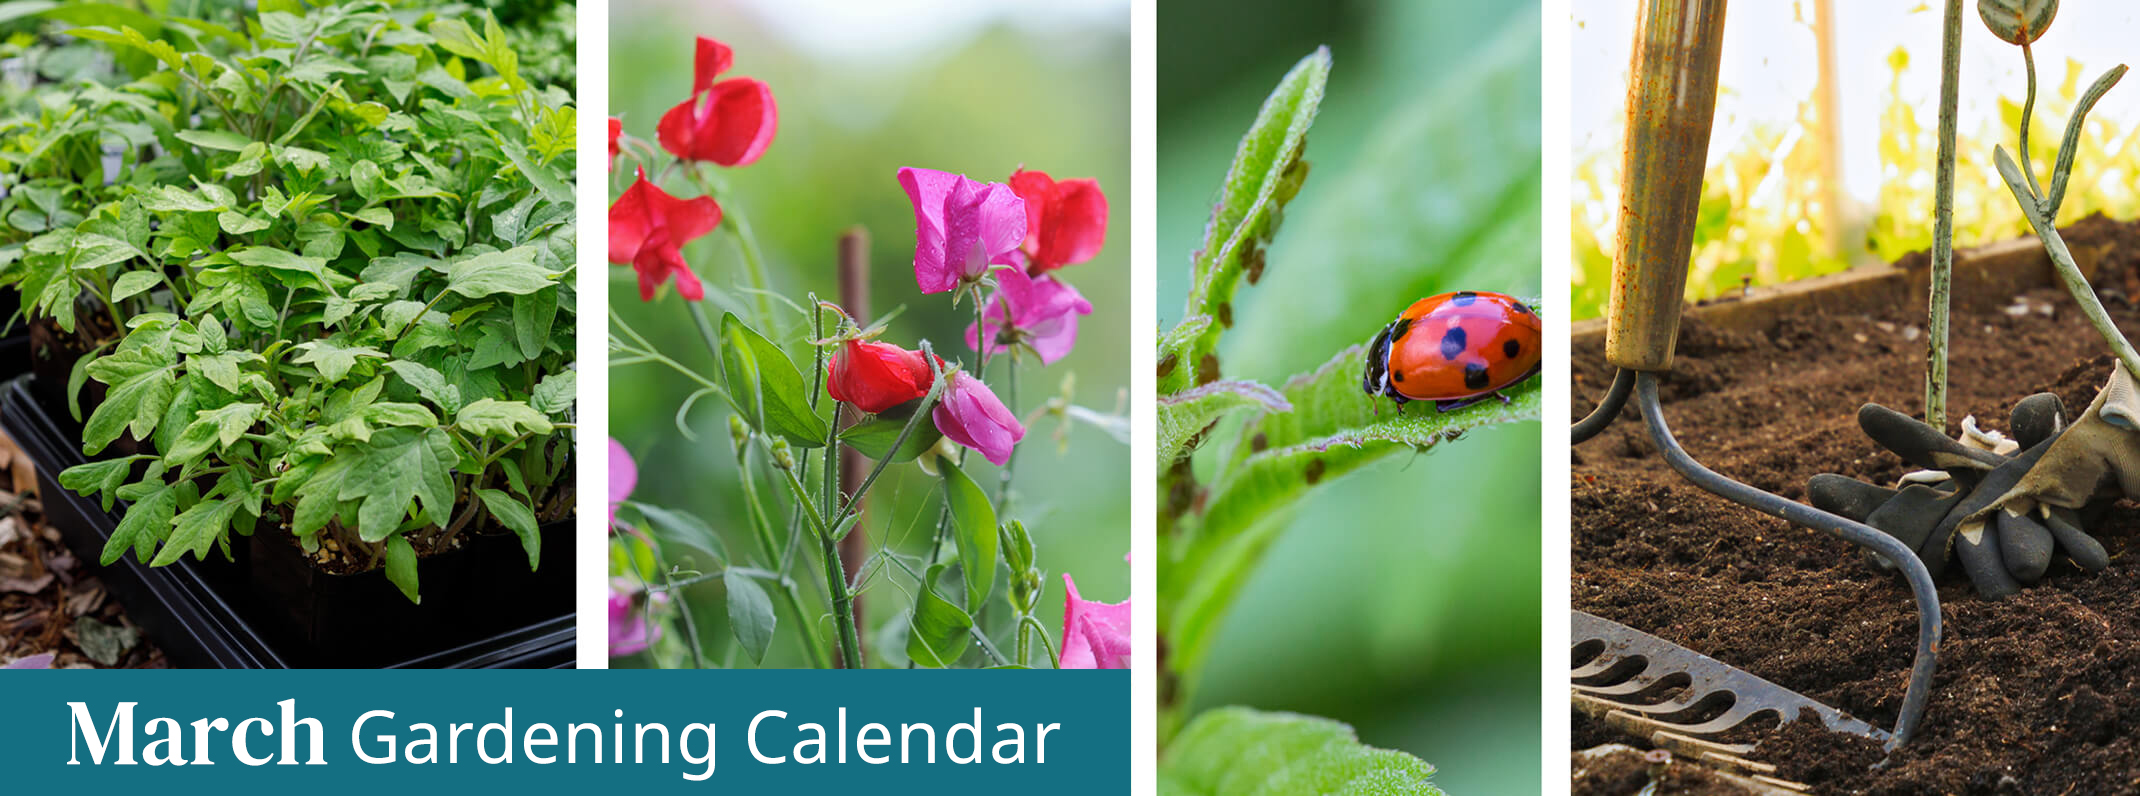 march gardening calendar seedlings sweet peas, lady bug heading towards aphids and prepping soil